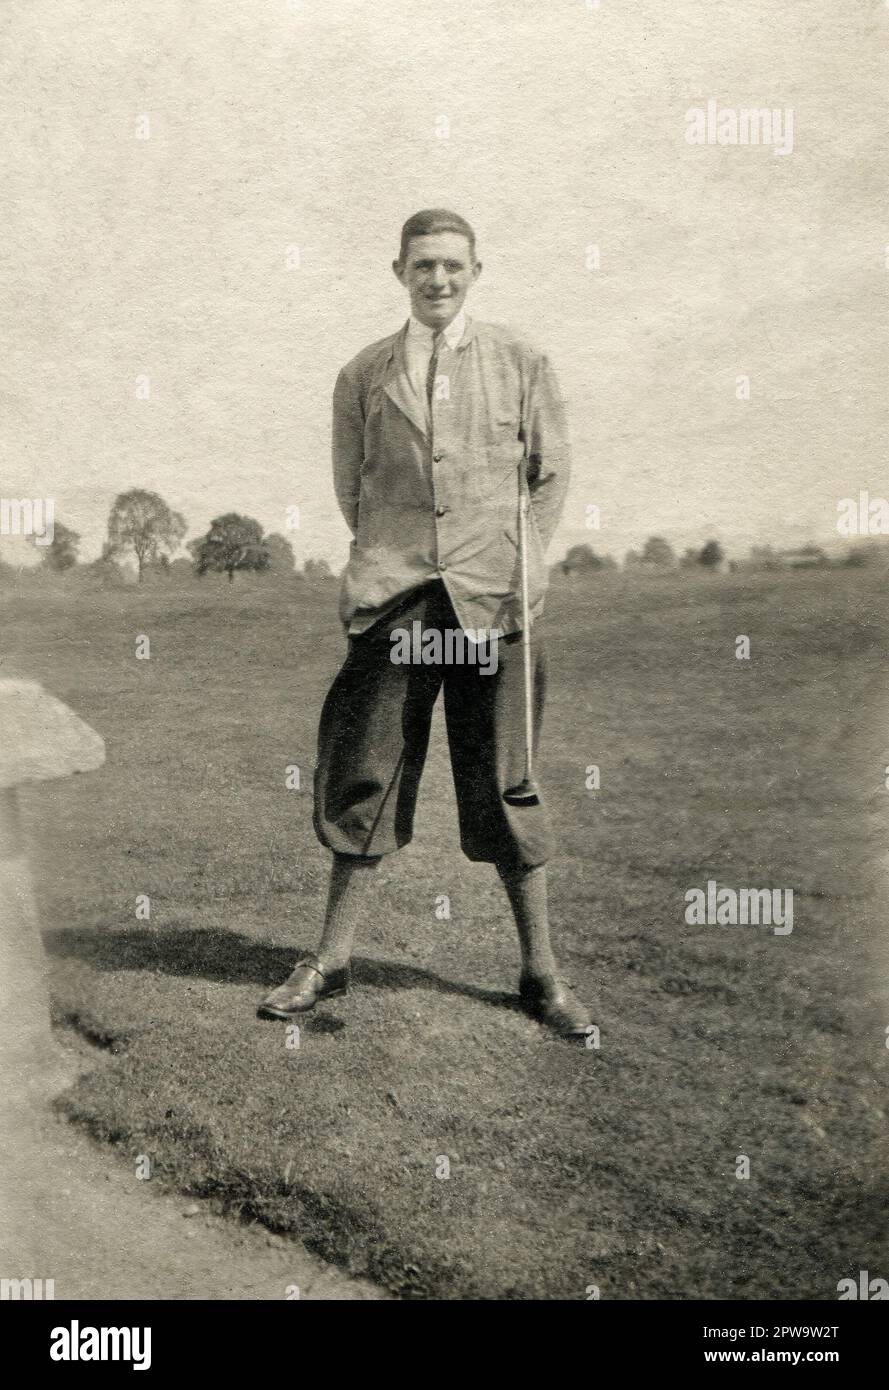 England. 1930s. A gentleman golfer posing for a photograph wearing plus fours and carrying a ‘brassie’ type golf club. Stock Photo